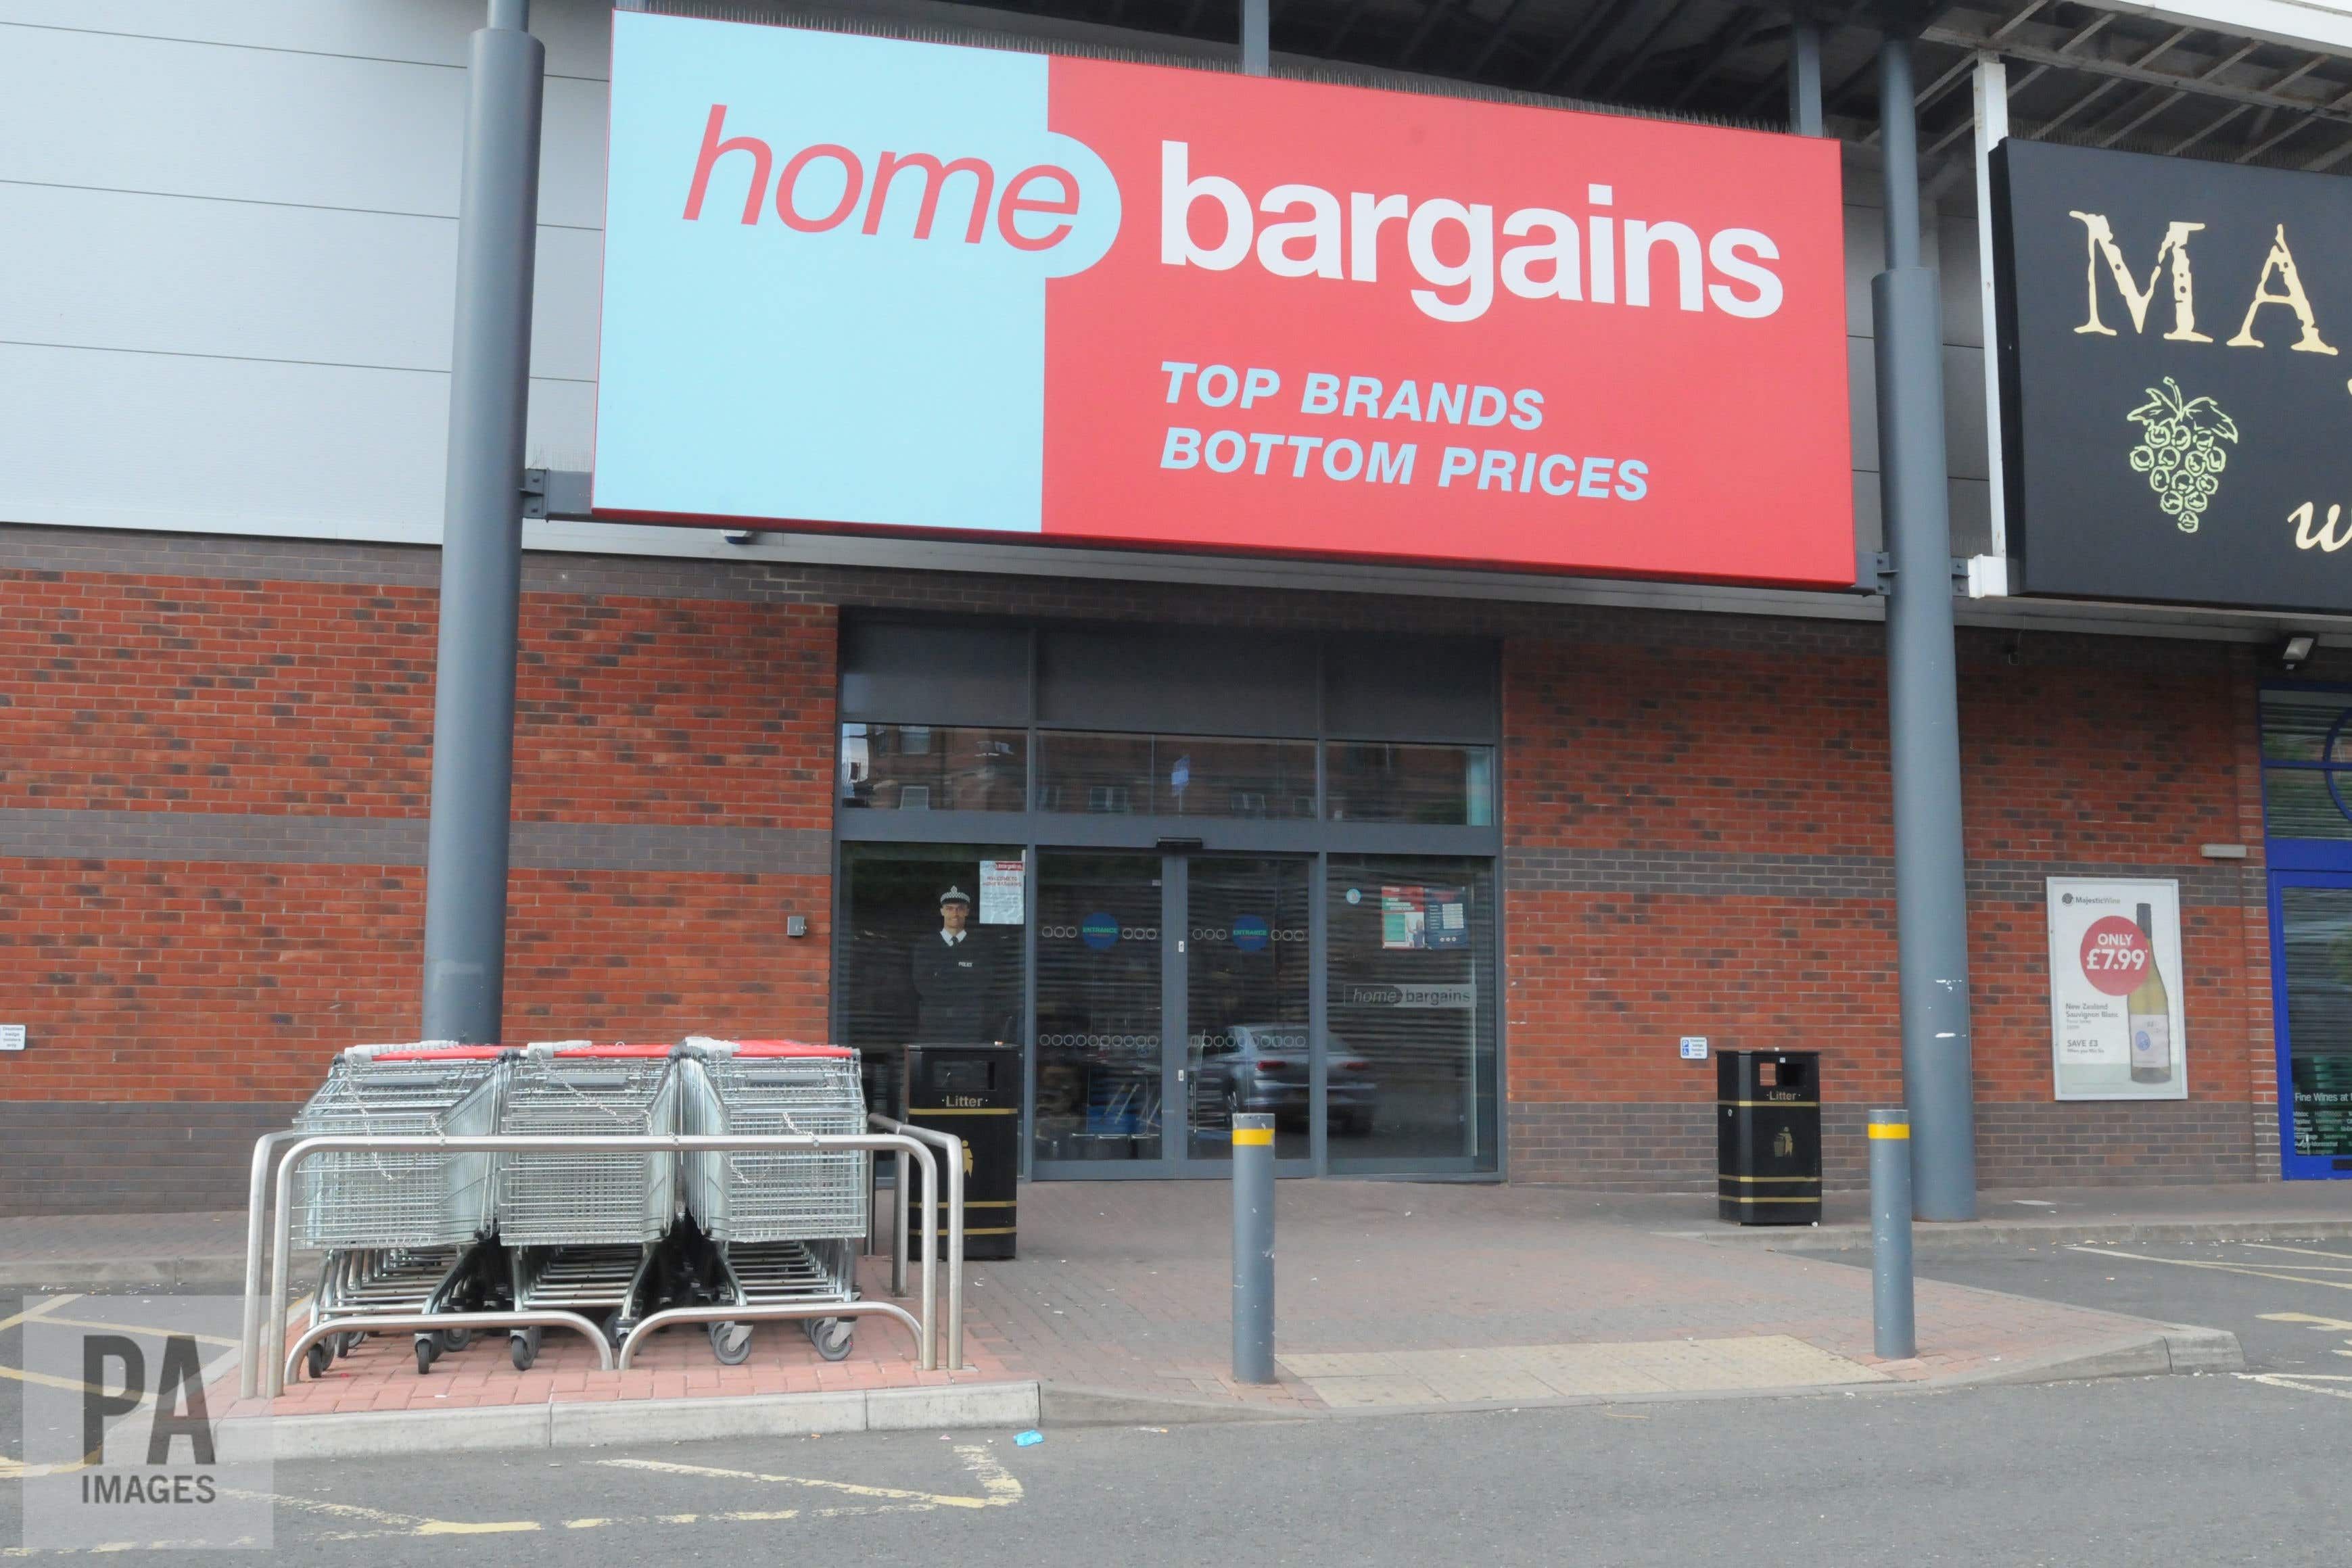 Home Bargains has launched a new crackdown on shoplifting in its stores